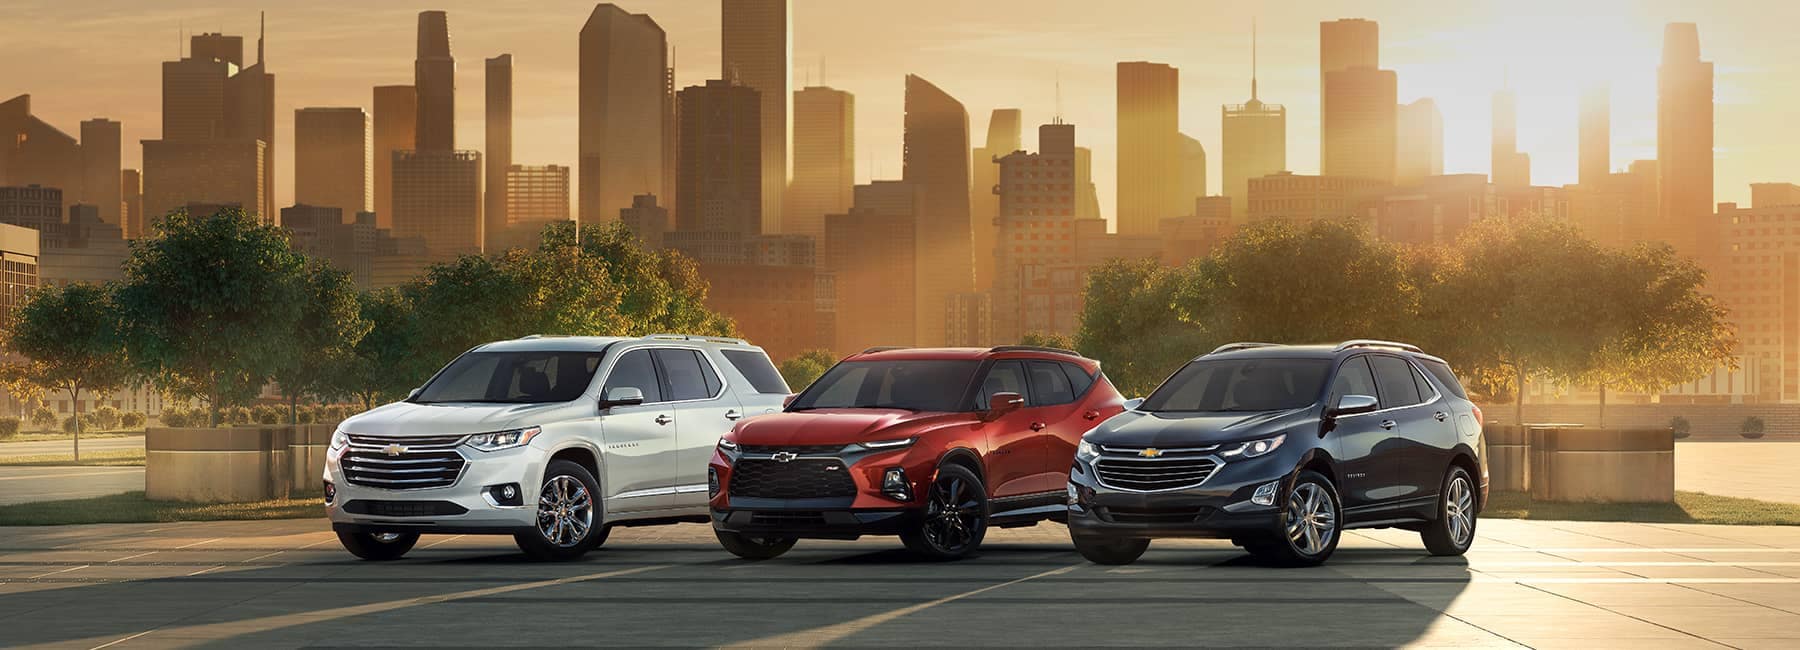 2020 Chevrolet Lineup Against a City Skyline at Sunset